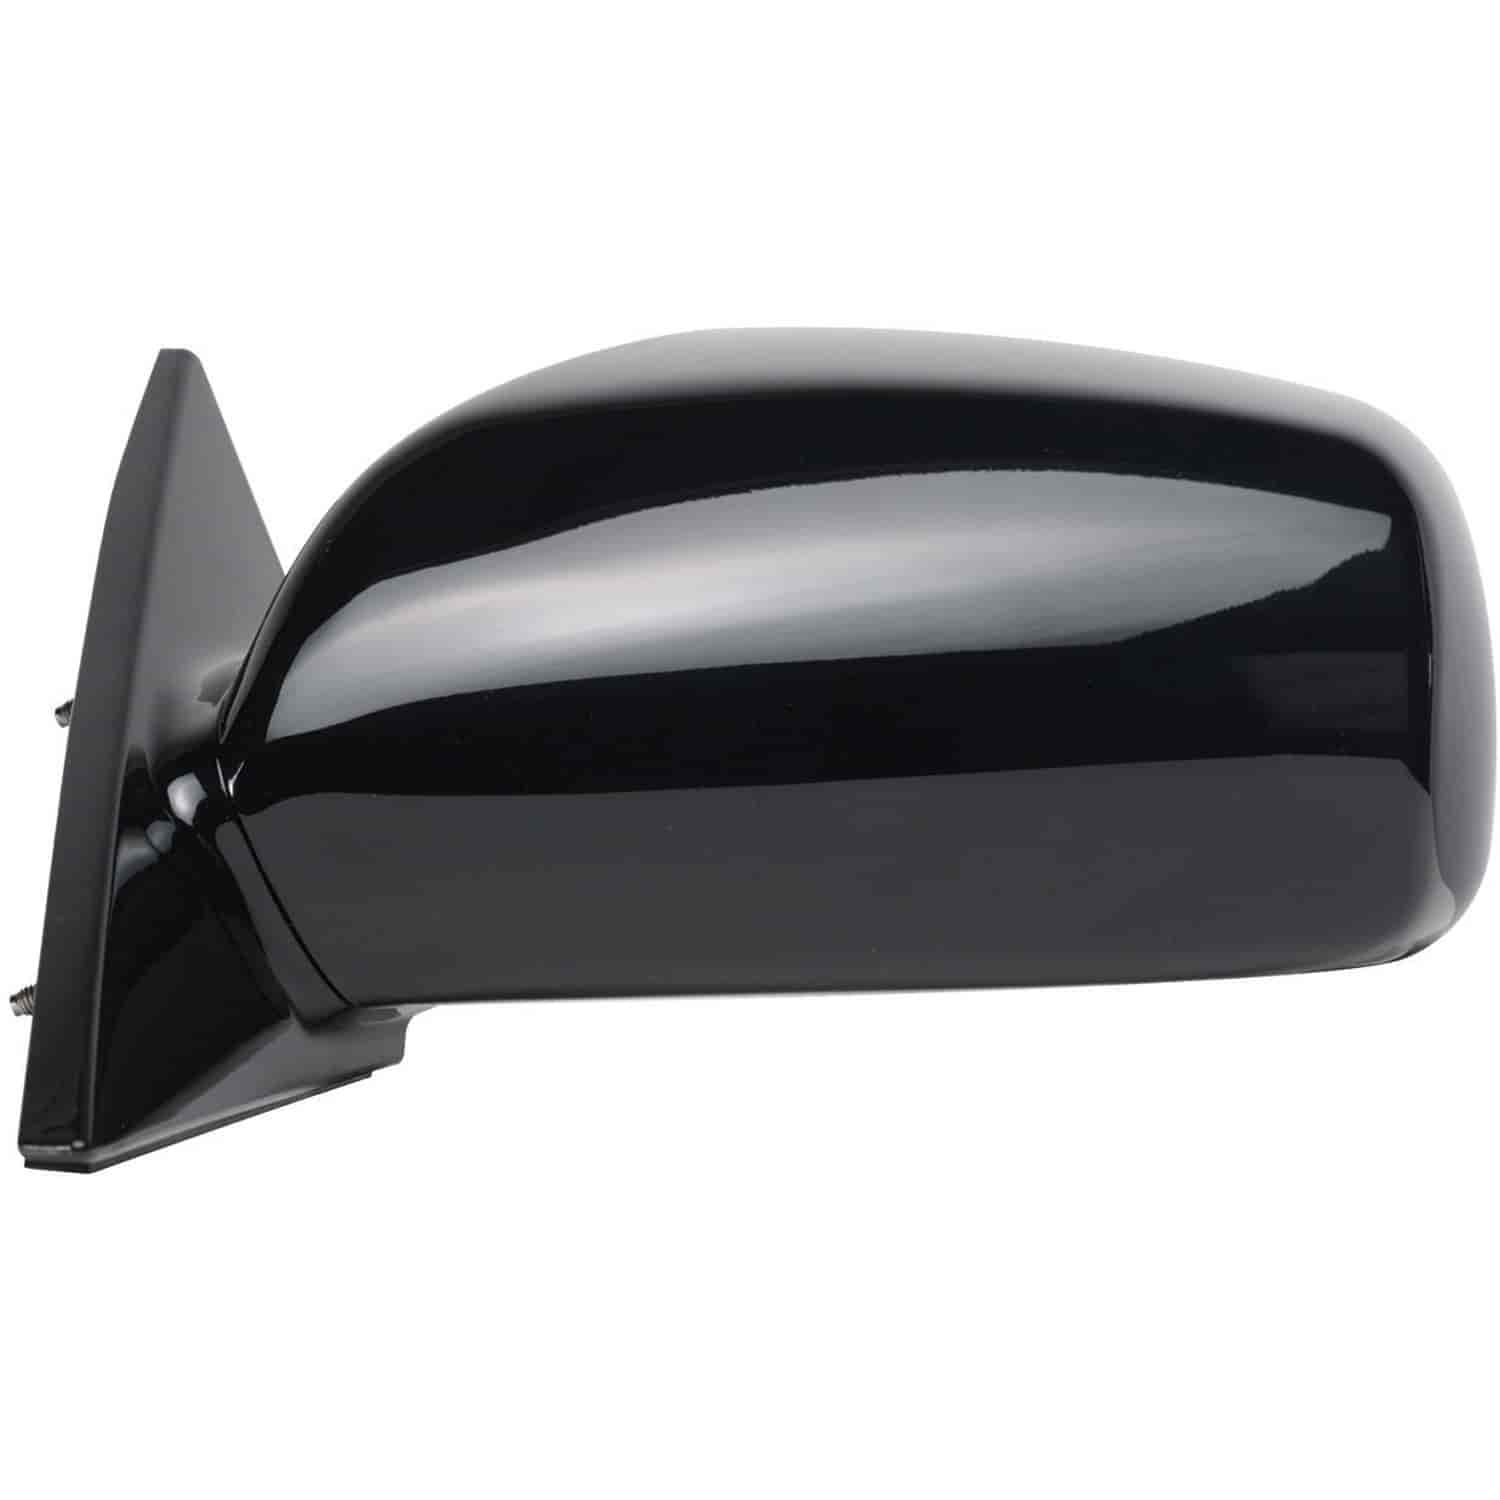 OEM Style Replacement mirror for 04-08 Toyota Solara Coupe/Convertible driver side mirror tested to